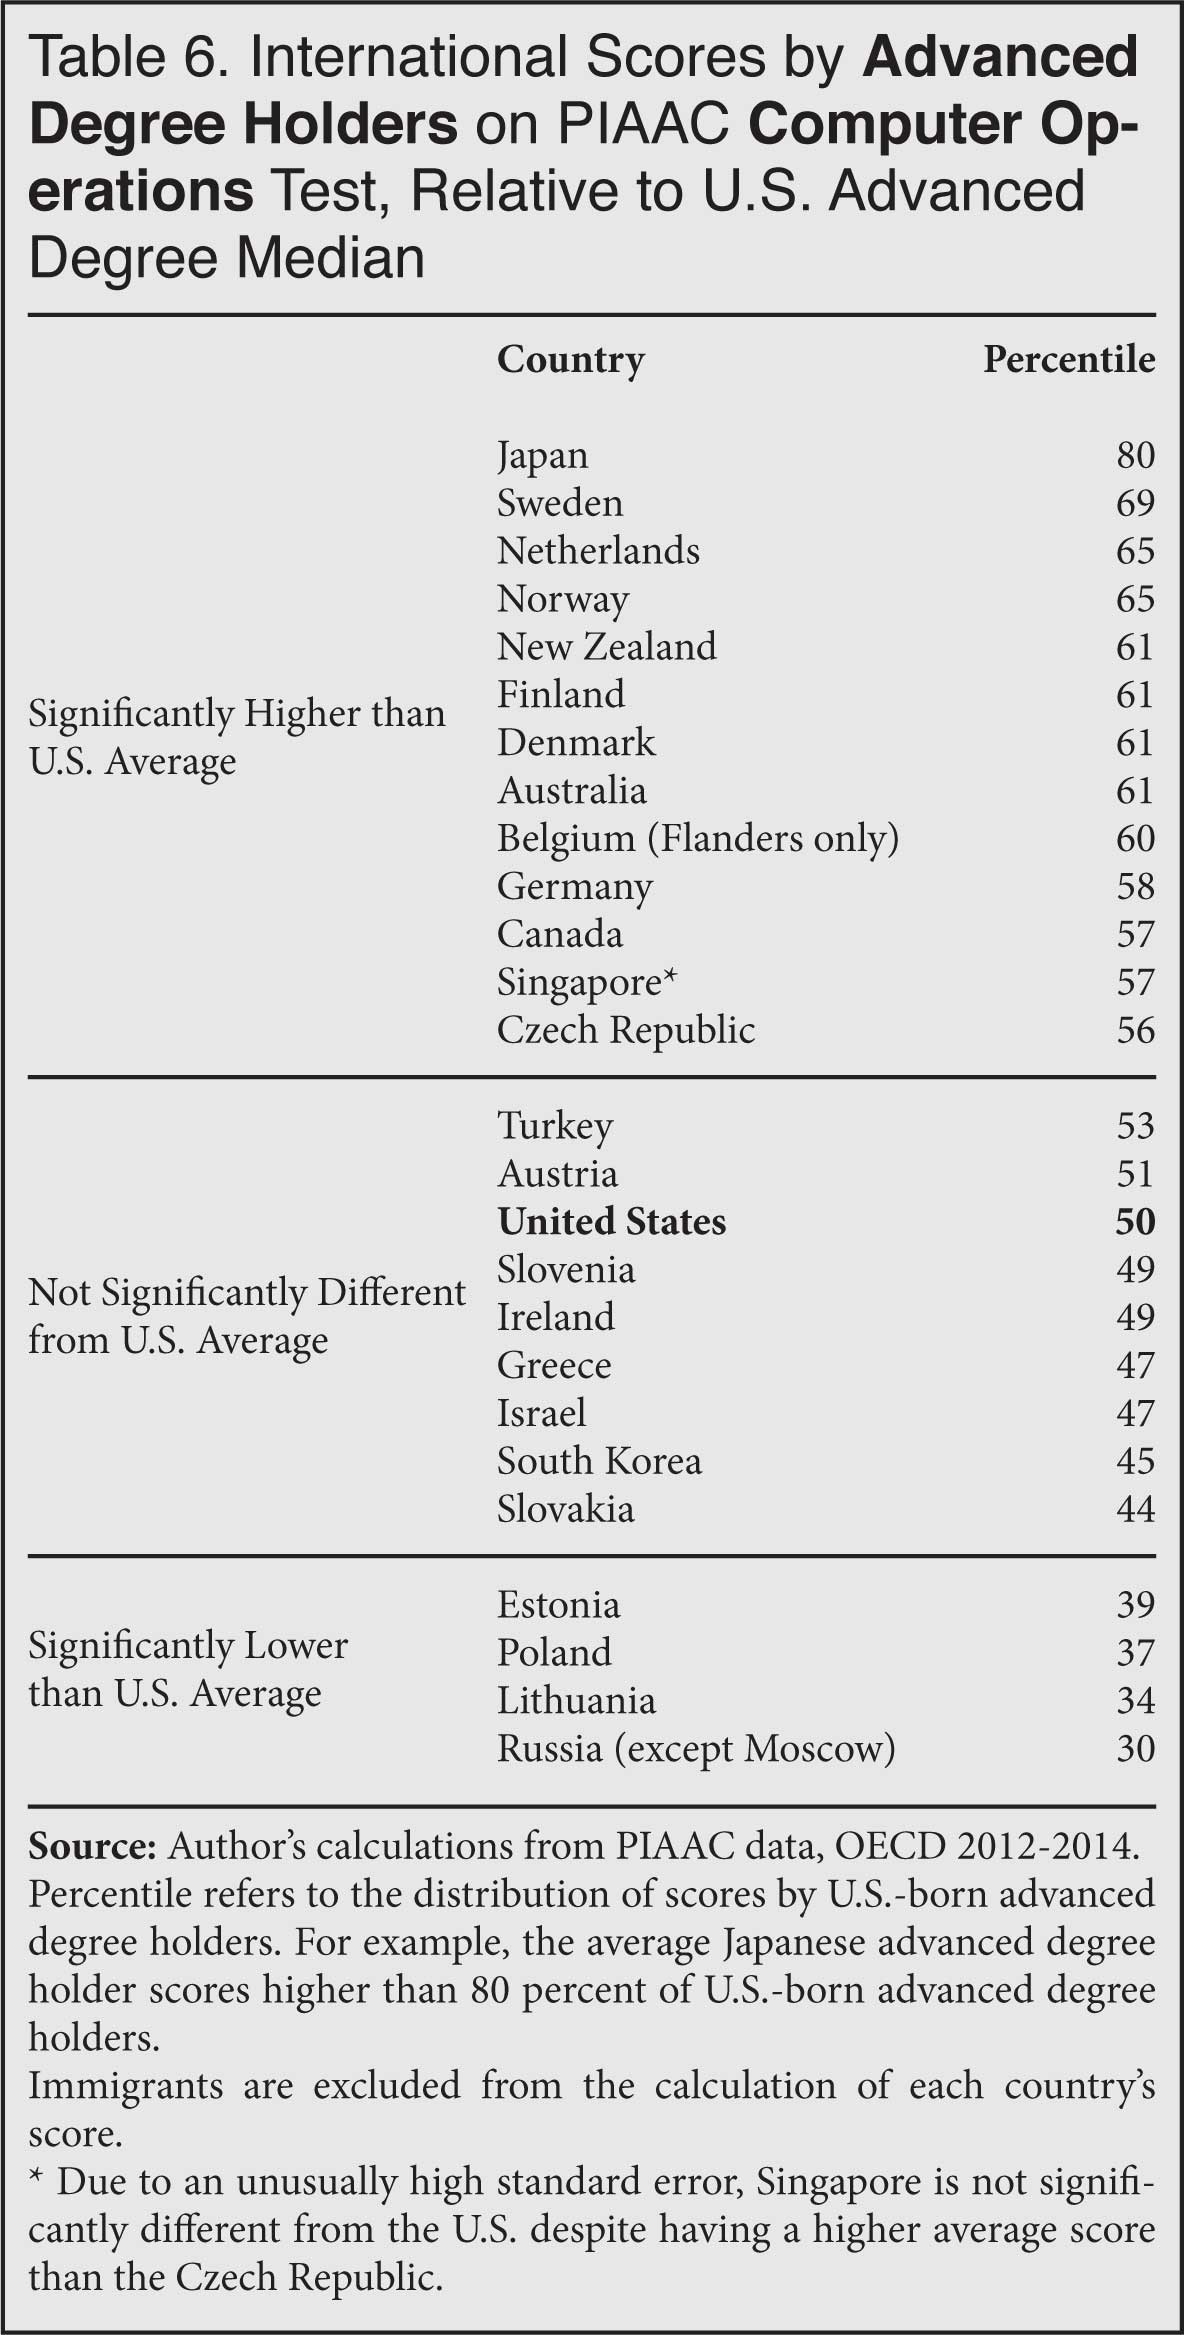 Table: International Scores by Advanced Degree Holders on PIAAC Computer Operations Test, Relative to US Advanced Degree Holders